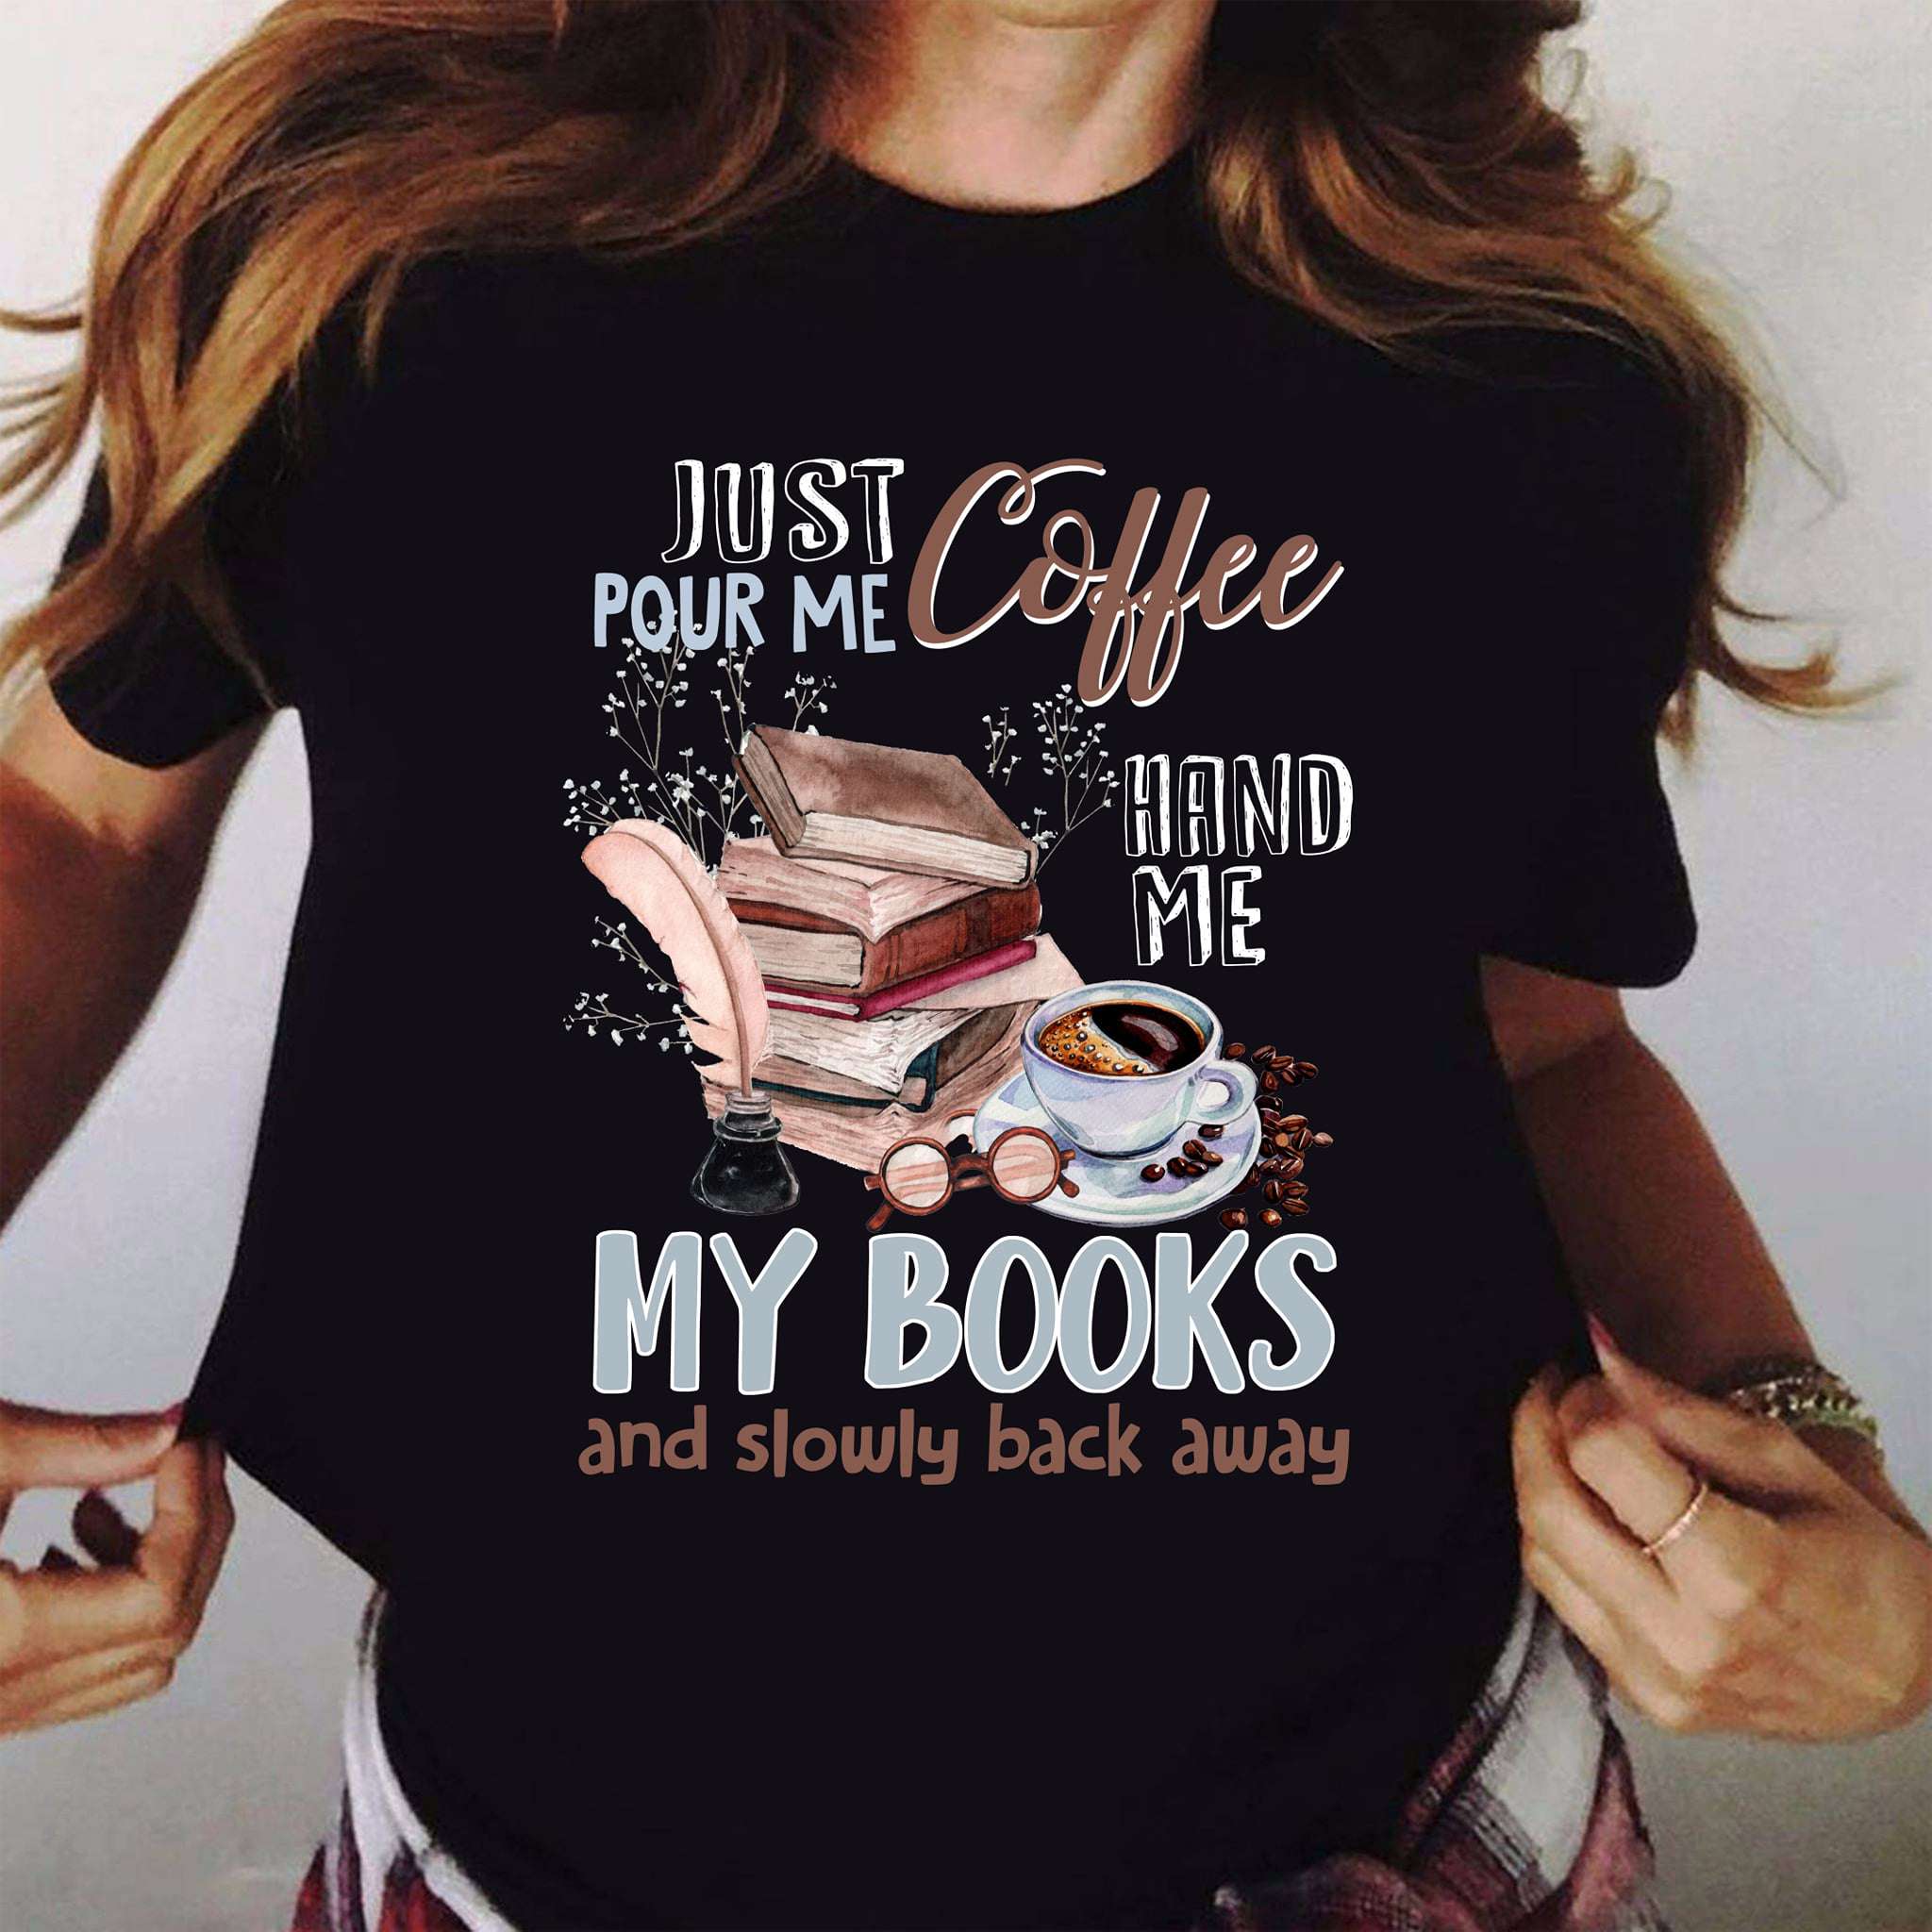 Just pour me coffee, hand me my books and slowly back away - Coffee and books, reading book the hobby